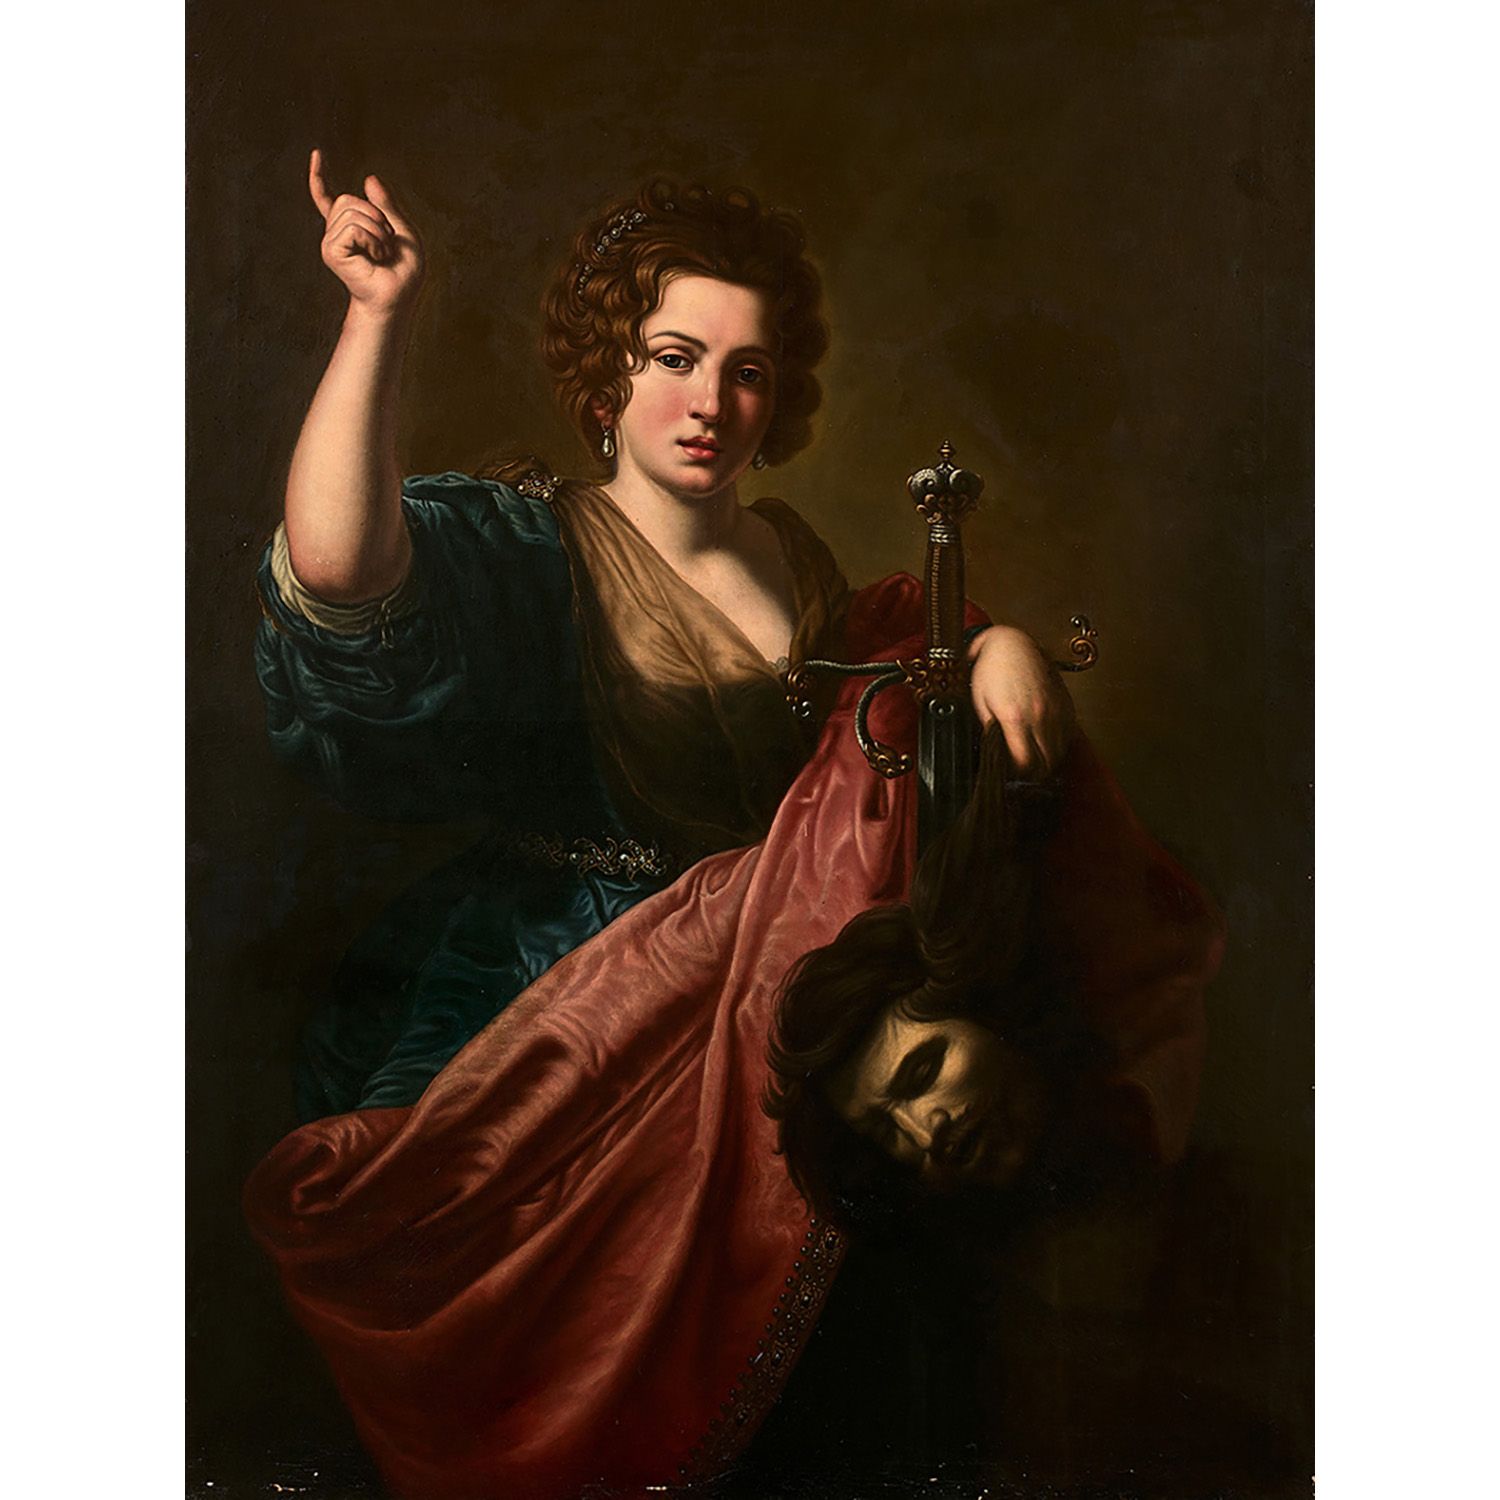 Null 19th CENTURY FRENCH SCHOOL, AFTER VALENTIN DE BOULOGNE
JUDITH
Canvas
Framel&hellip;